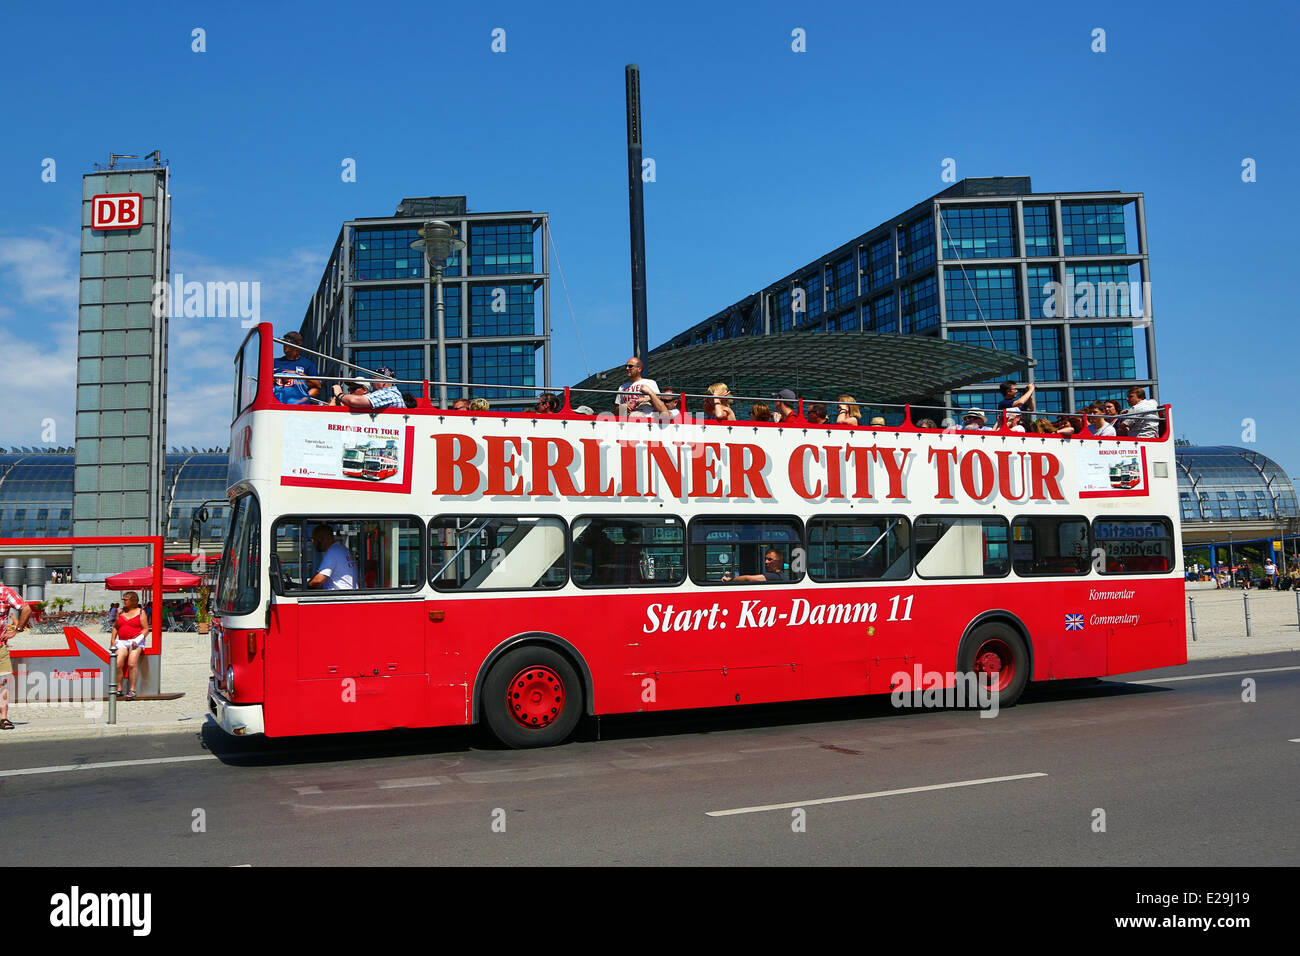 Berlin tourist sightseeing tour bus outside the Hauptbahnhof central station in Berlin, Germany Stock Photo